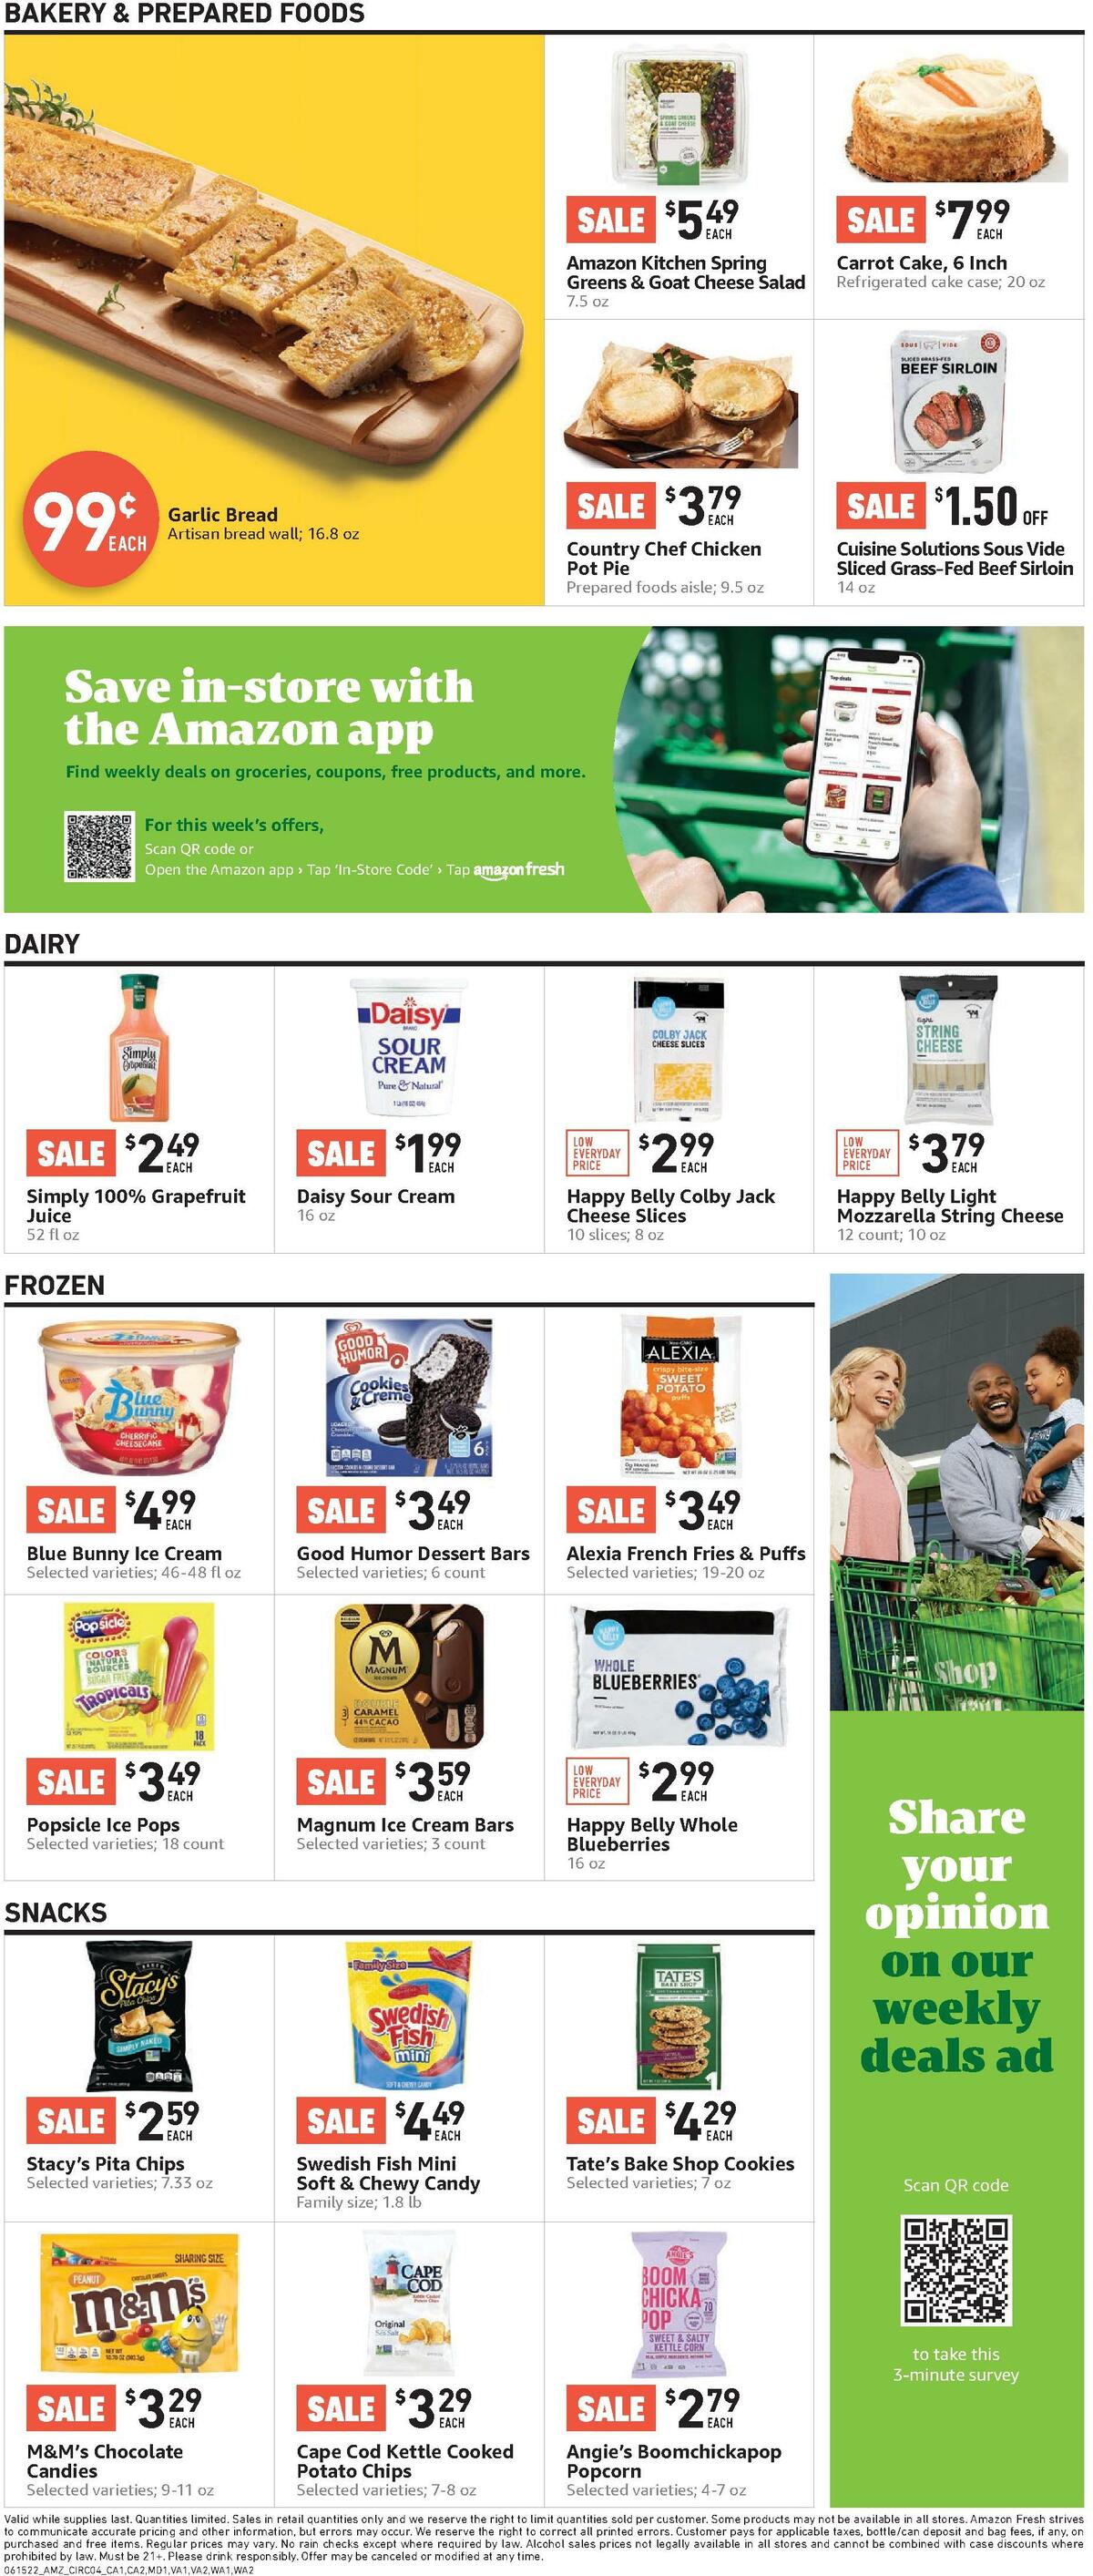 Amazon Fresh Weekly Ad from June 15